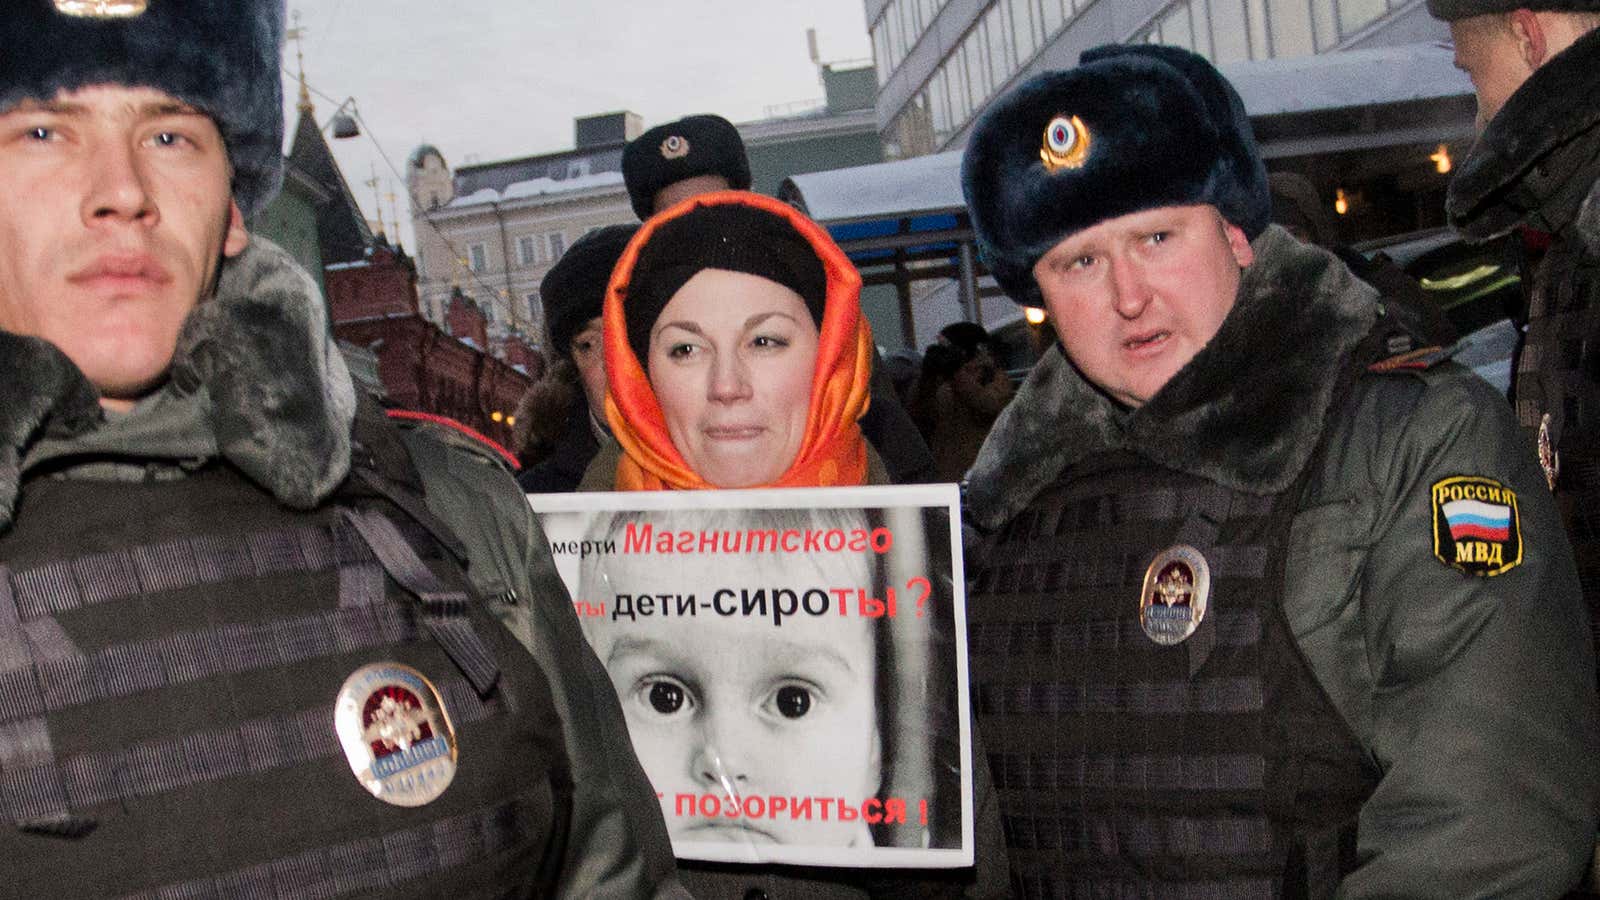 Protest in Moscow against anti-US legislation.